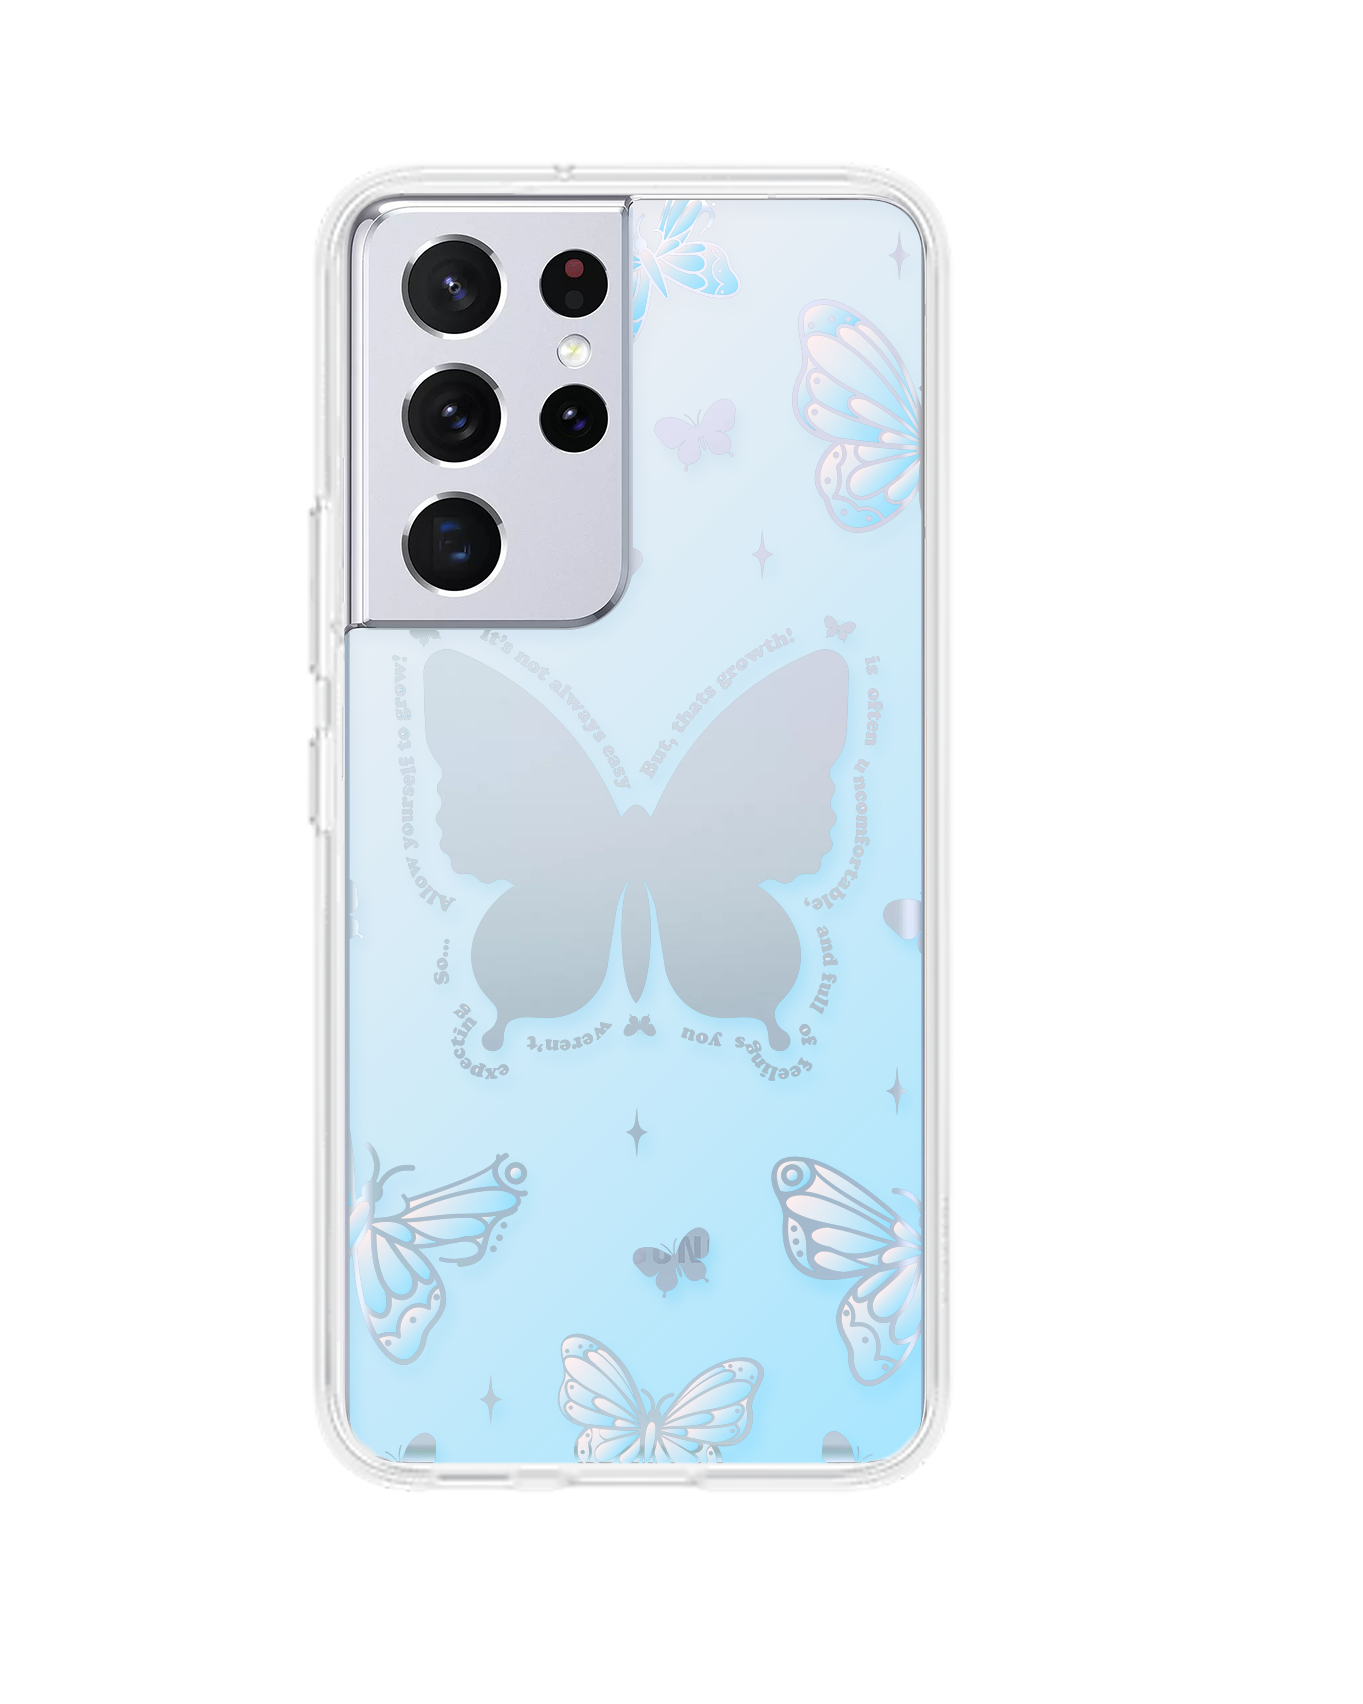 Android Rearguard Hybrid Case - Butterfly Effect